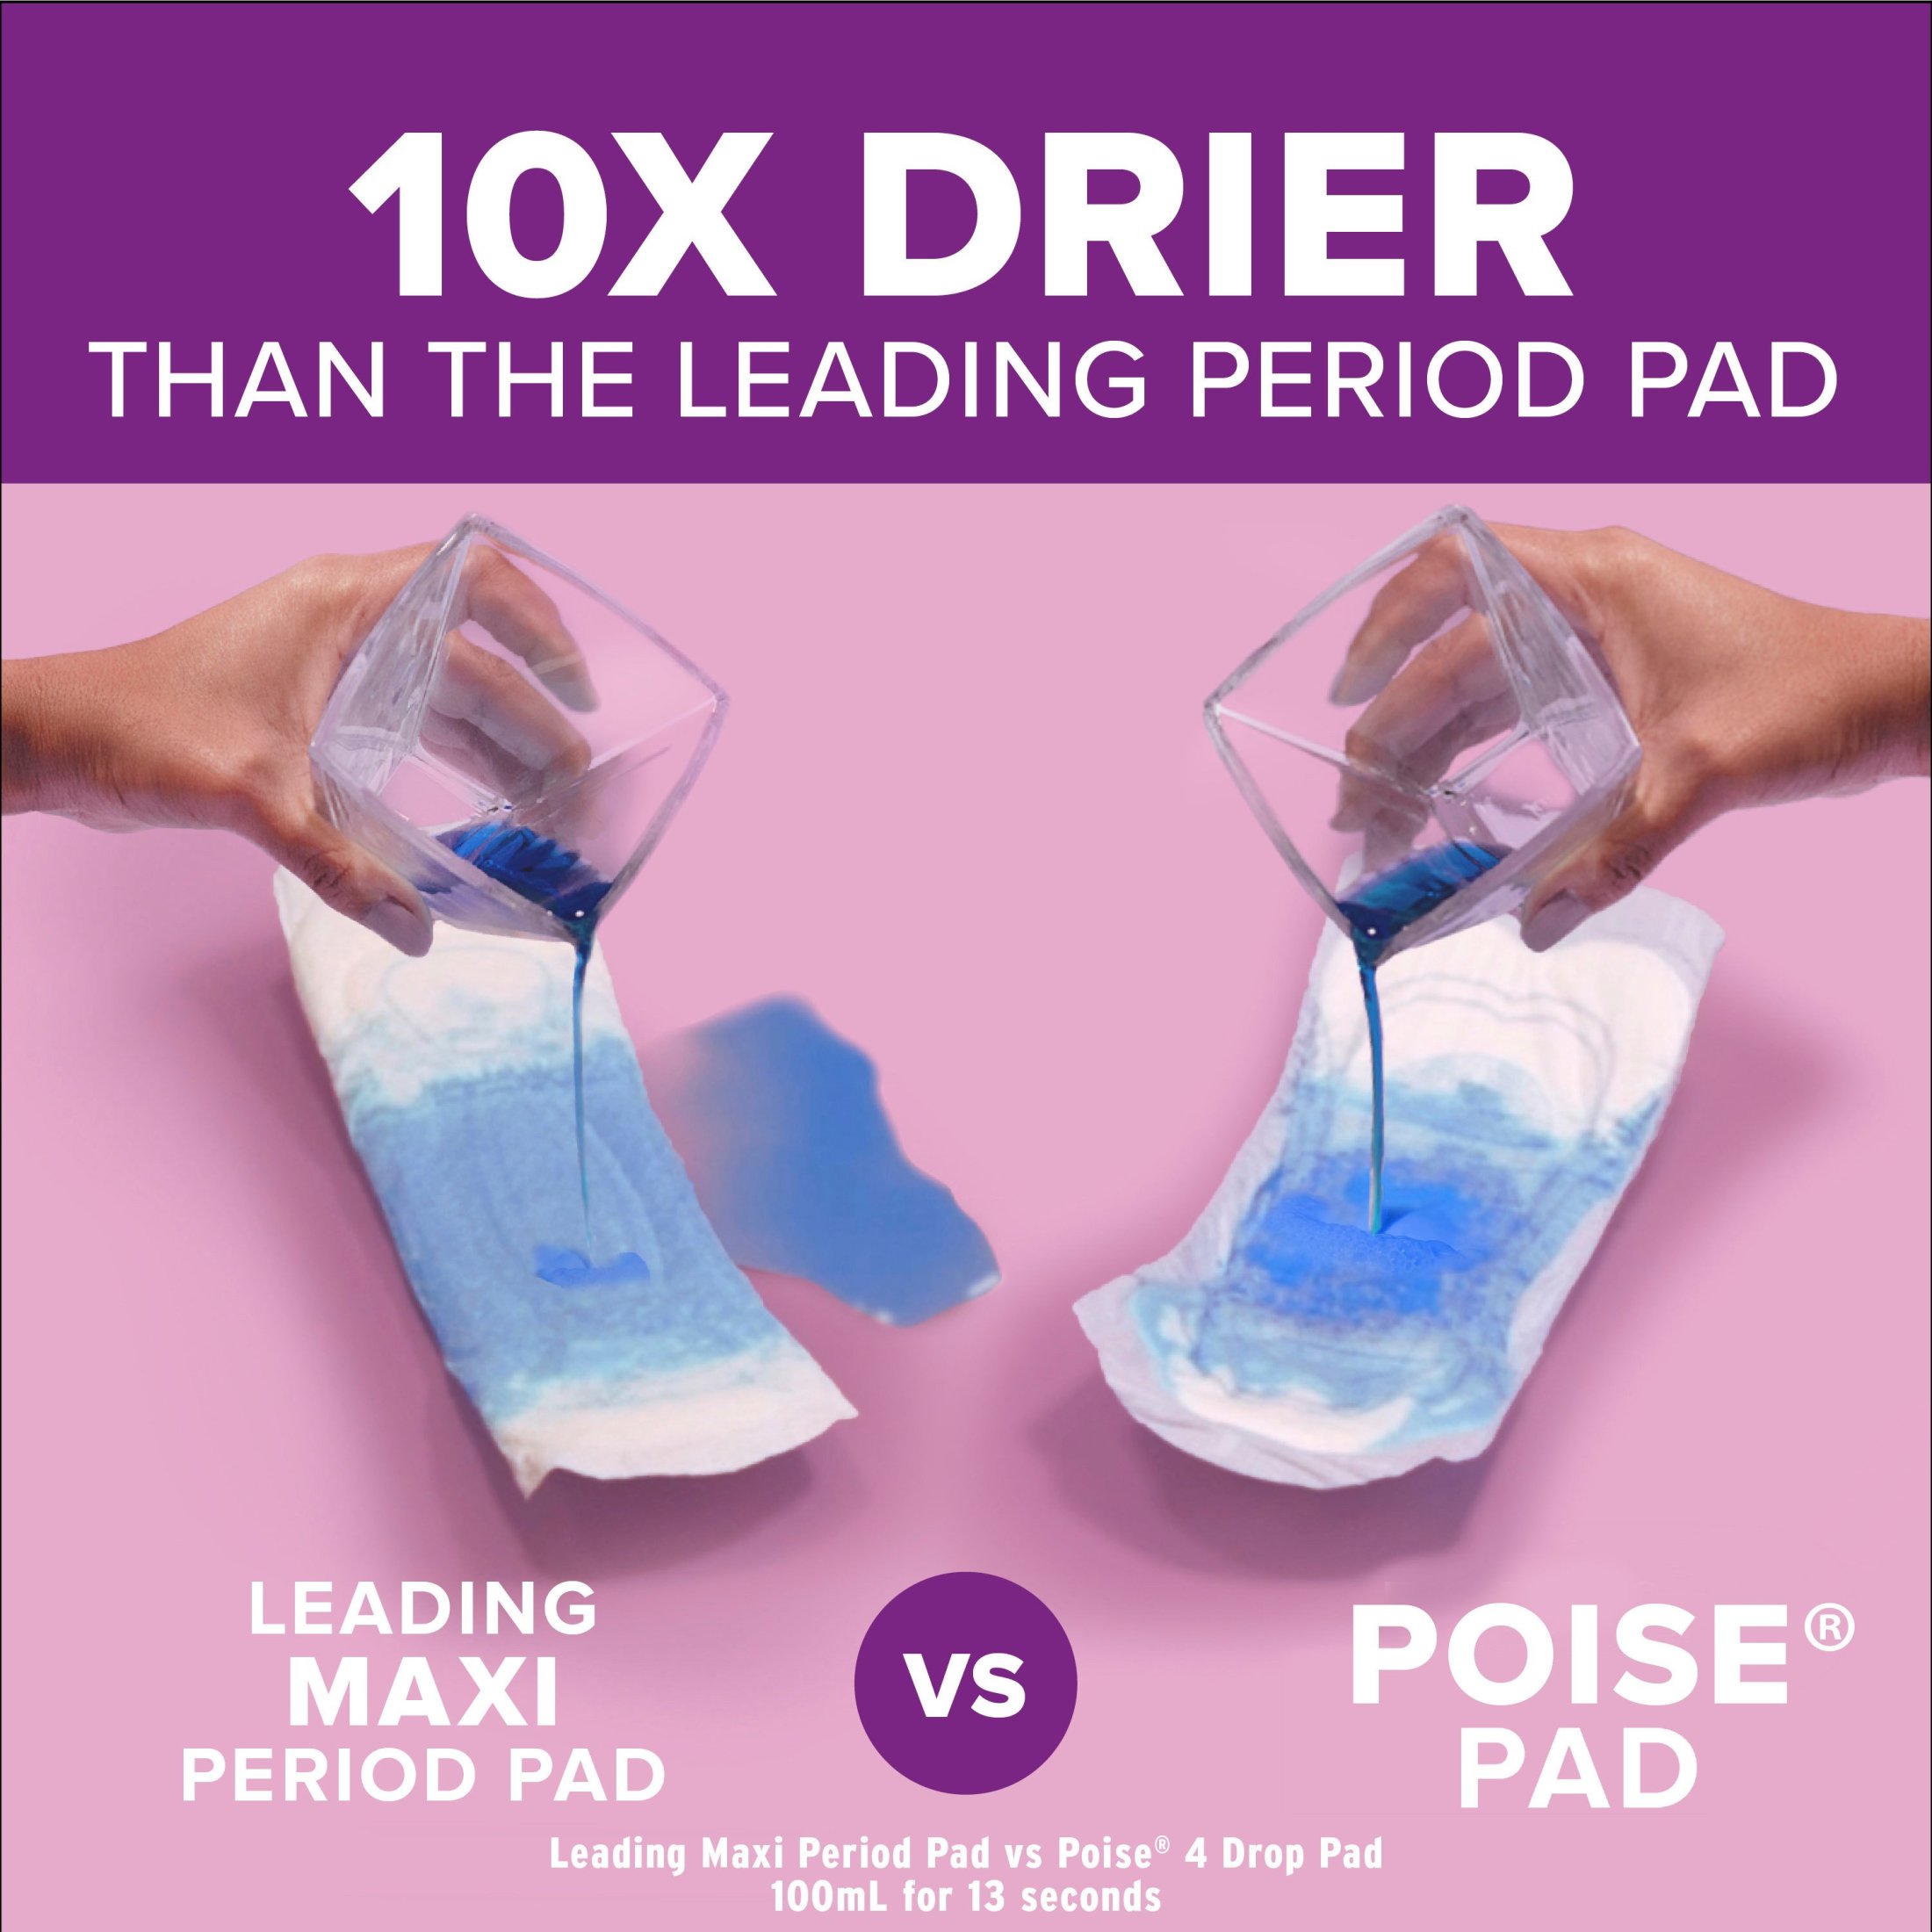 Poise Incontinence Pads for Women, 4 Drop, Moderate Absorbency, Long, 54 Count - image 3 of 8